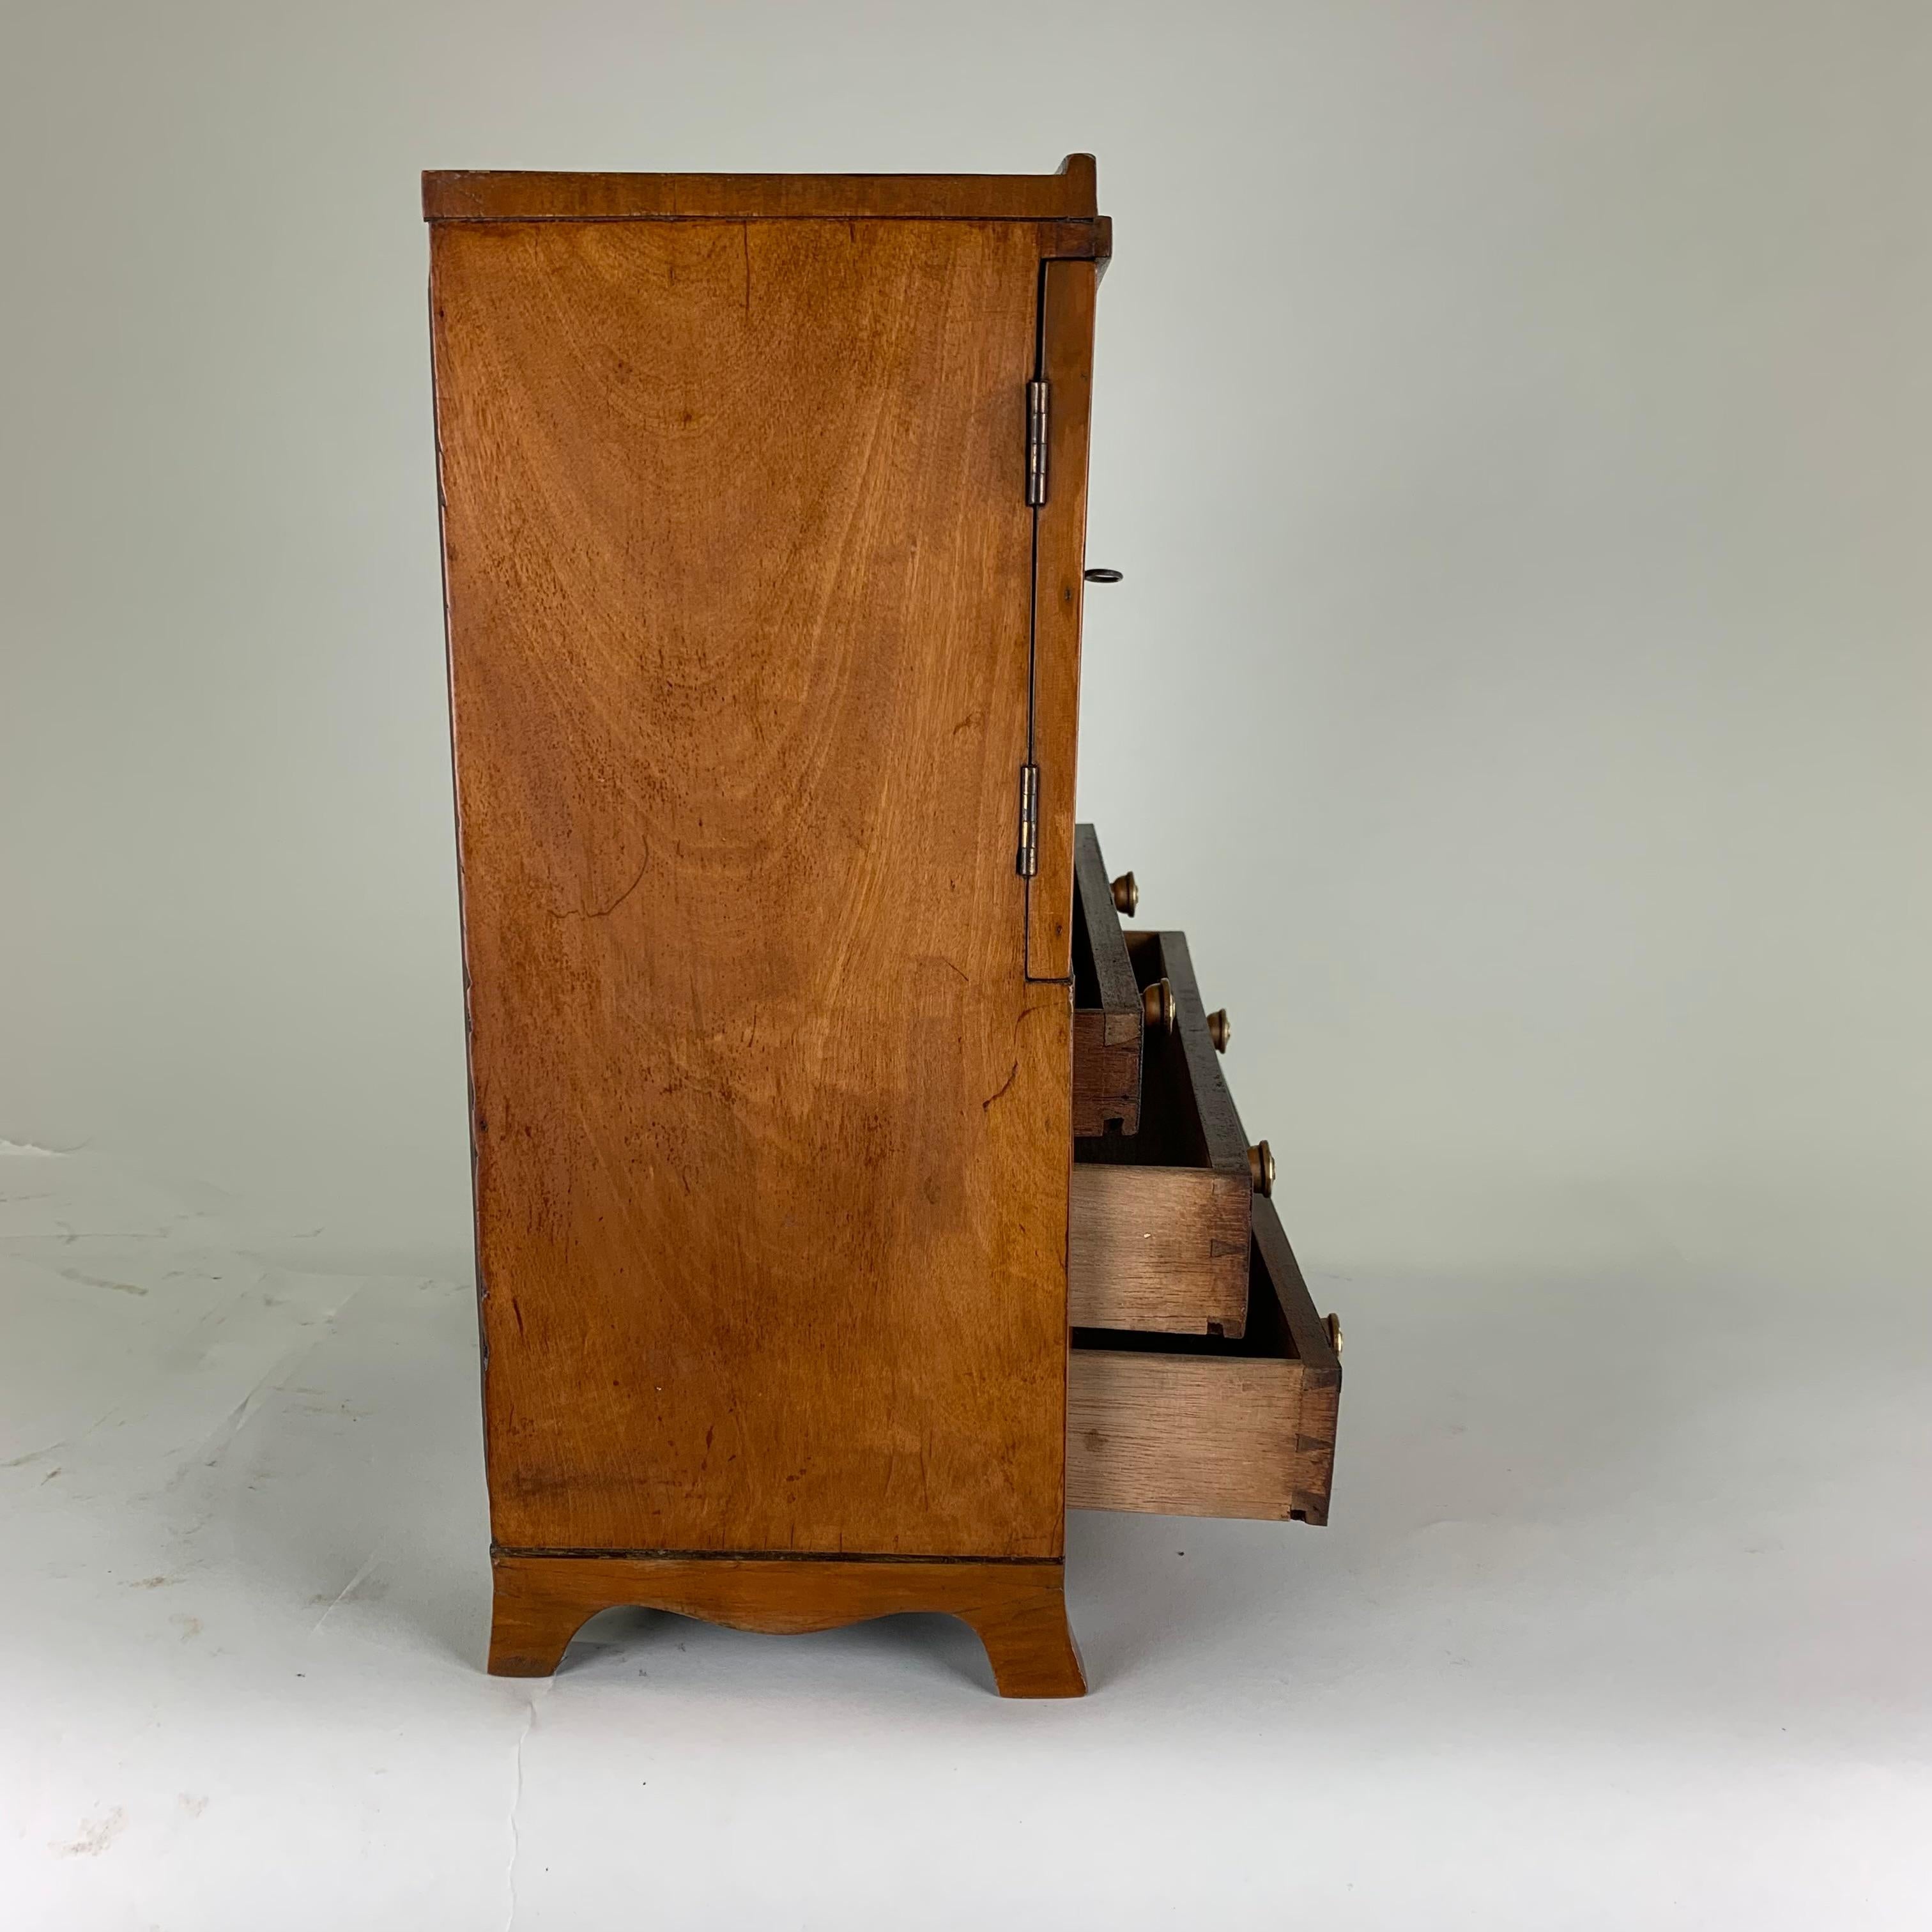 An exceptionally fine quality and rare Regency, miniature satinwood linen press on splay feet with a shaped apron. Fitted with three long drawers with brass knobs. The top has a pair of doors with oval panels enclosing three sliding trays.
A